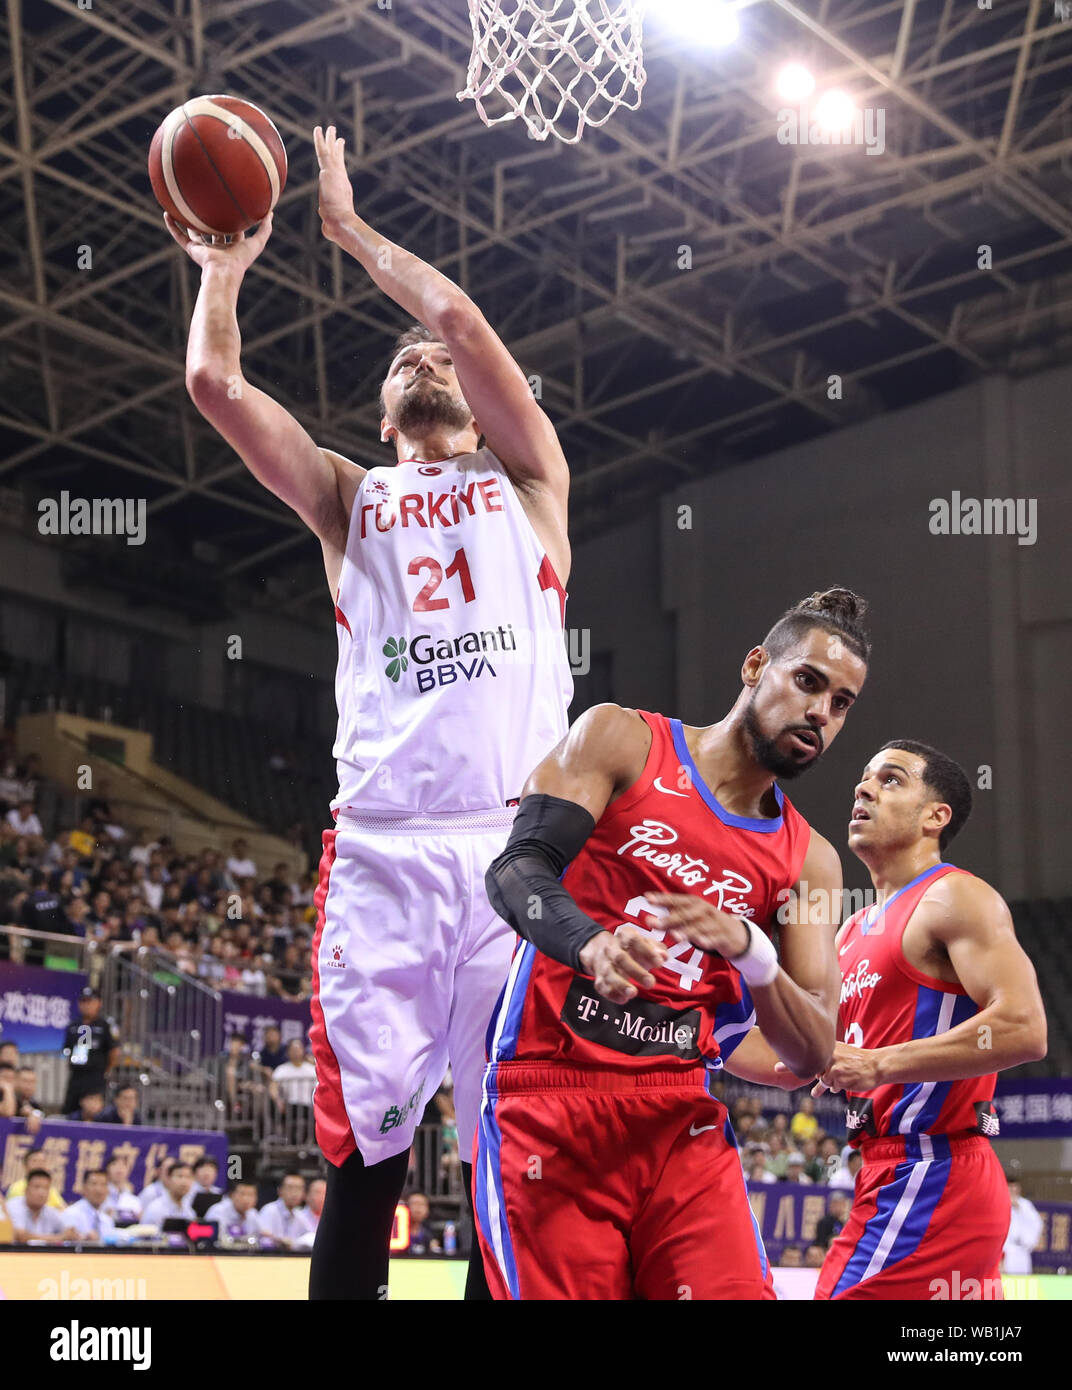 Suzhou, China's Jiangsu Province. 23rd Aug, 2019. Turkey's Sertac Sanli (L) shoots the ball during a match against Puerto Rico at the 2019 Suzhou International Basketball Challenge and Culture Week in Suzhou, east China's Jiangsu Province, Aug. 23, 2019. Credit: Yang Lei/Xinhua/Alamy Live News Stock Photo